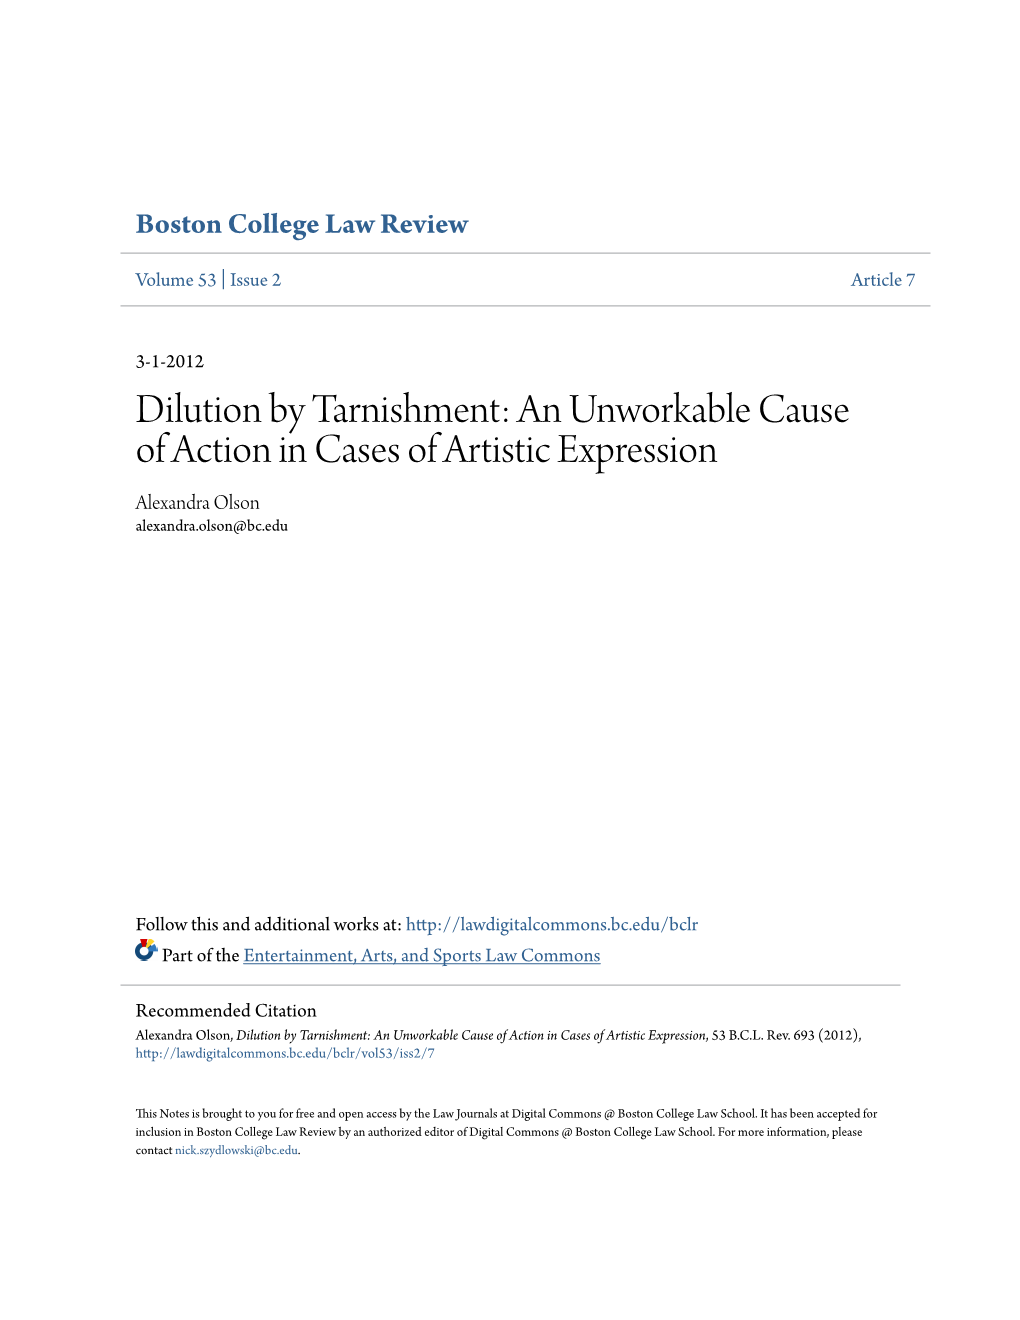 Dilution by Tarnishment: an Unworkable Cause of Action in Cases of Artistic Expression Alexandra Olson Alexandra.Olson@Bc.Edu